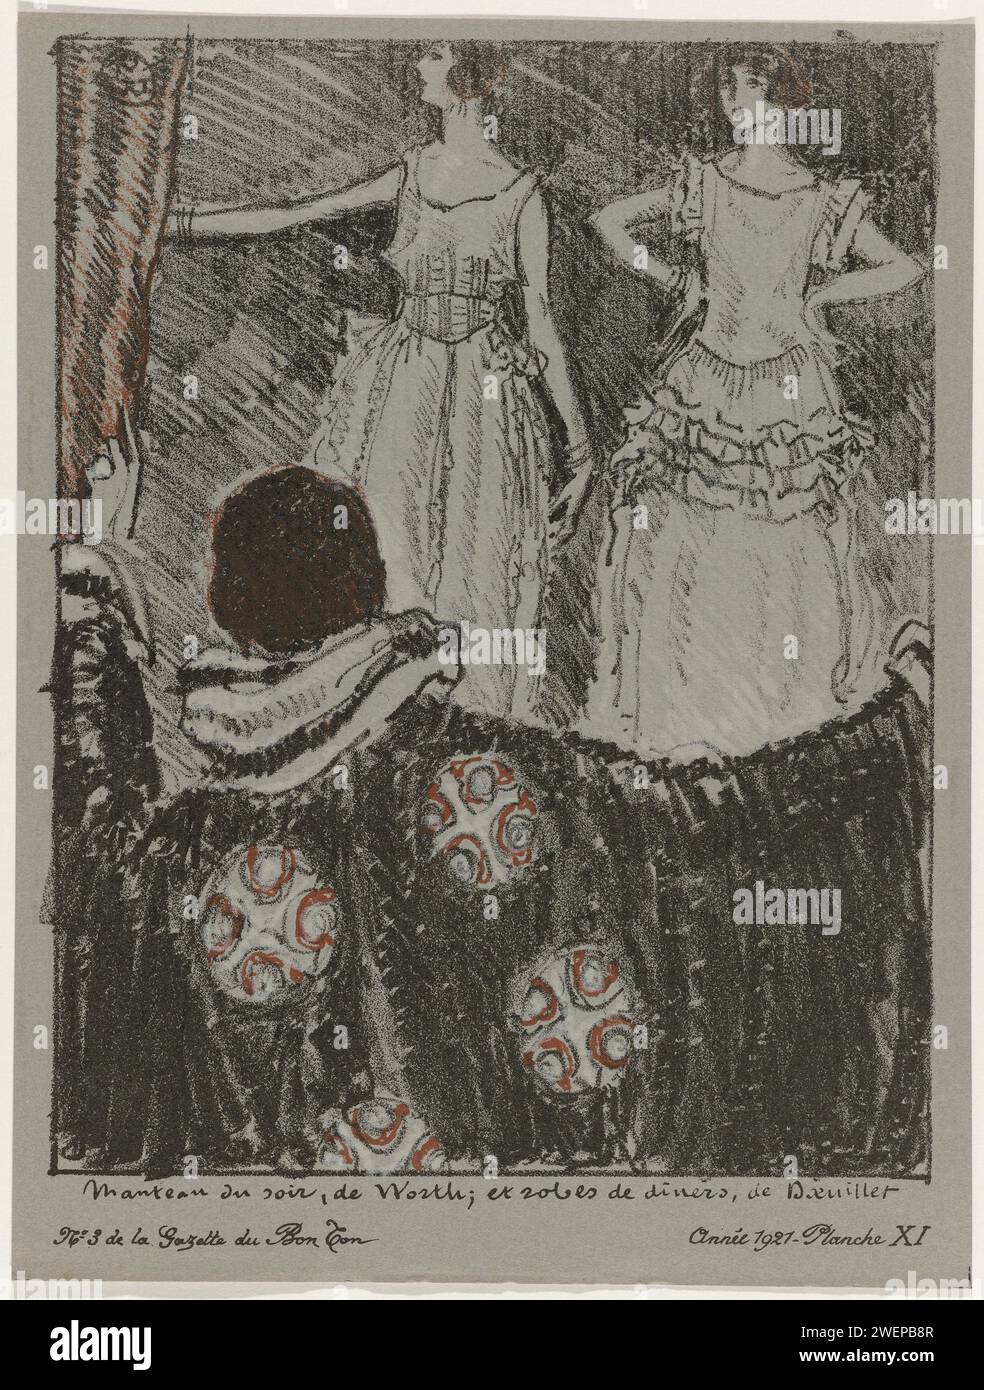 Gazette du Bon Ton, 1921 - No. 3, Pl. XI: evening coat, Worth; and dinner dresses, Doeuillet, Porter Woodruff, 1921  The woman in the foreground, seen on the back, is dressed in a black evening mantle from Worth. The other two women wear Dinerjapons from Doeuillet. Planche XI from a series of four lithographs entitled: 'Les Modes and L'An de Grace Mil Neuf Cent Vingt Un', from Gazette du Bon Ton 1921, No. 3. Explanation about the clothing on page 'Explication des planches'.  paper  fashion plates. dress, gown: dinner dress (+ women's clothes). coat (EVENING COAT) (+ women's clothes) Stock Photo